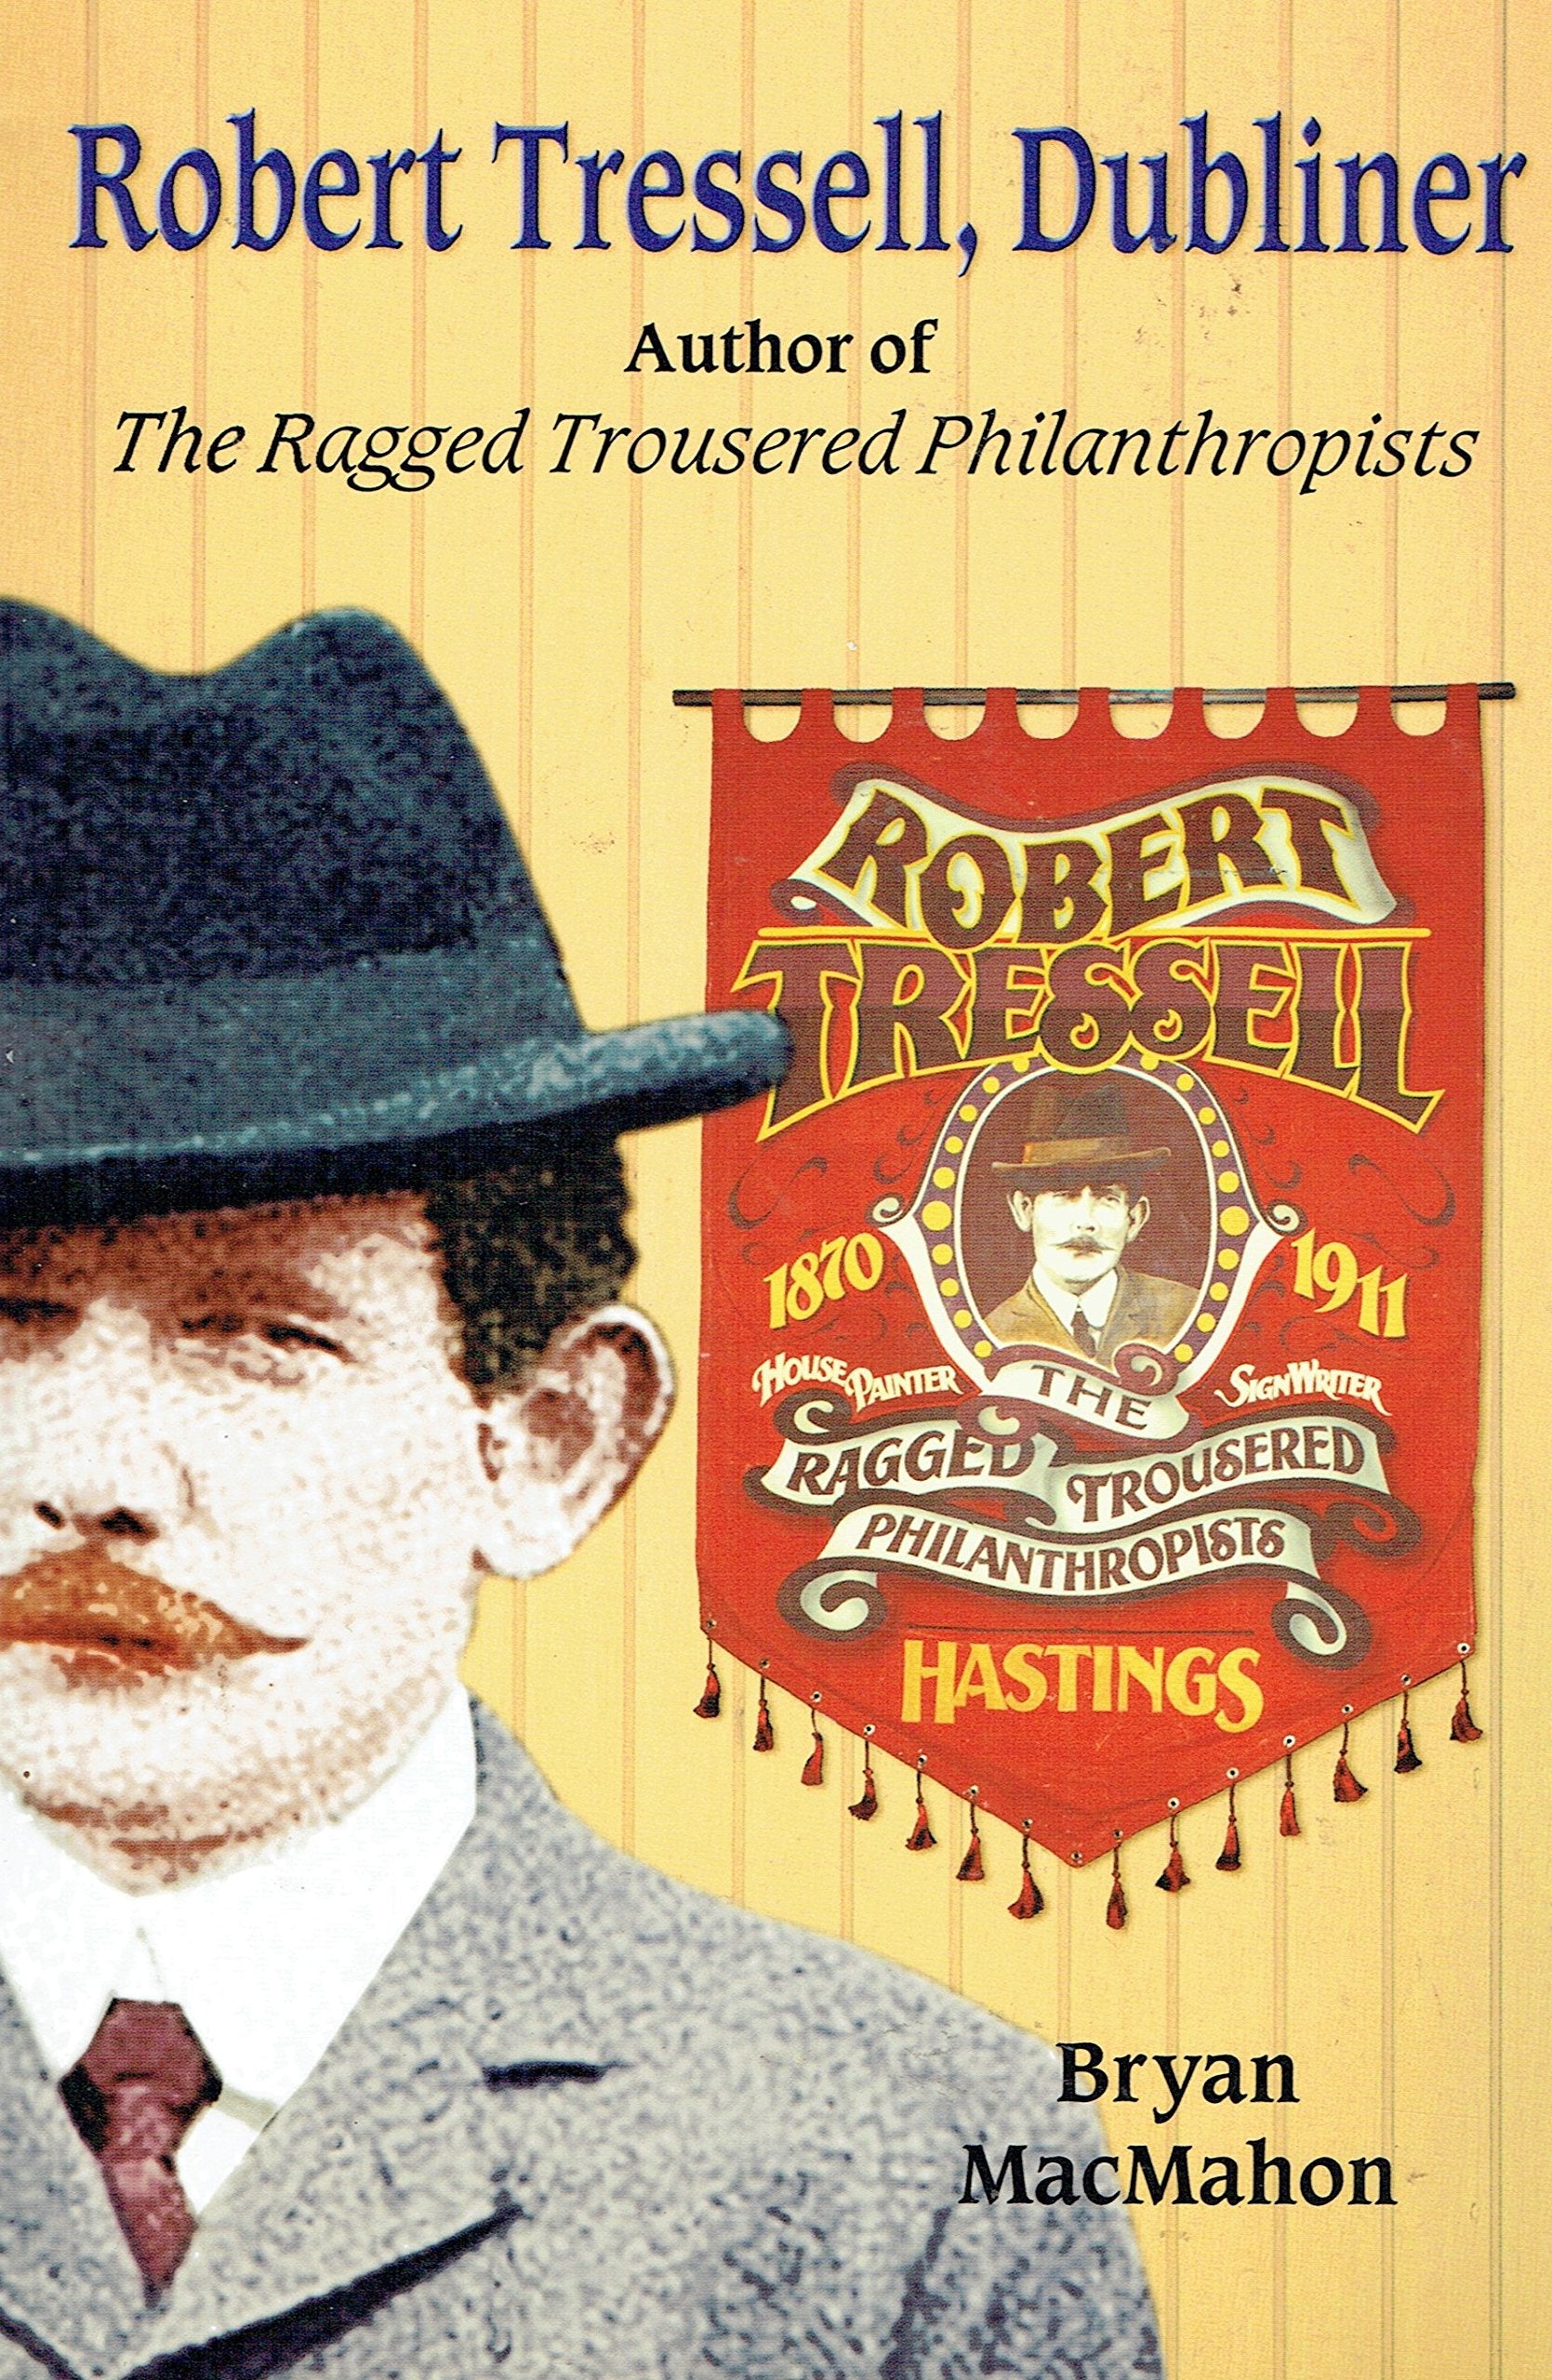 The Ragged Trousered Philanthropists download free in PDF or ePUB   AliceAndBooks